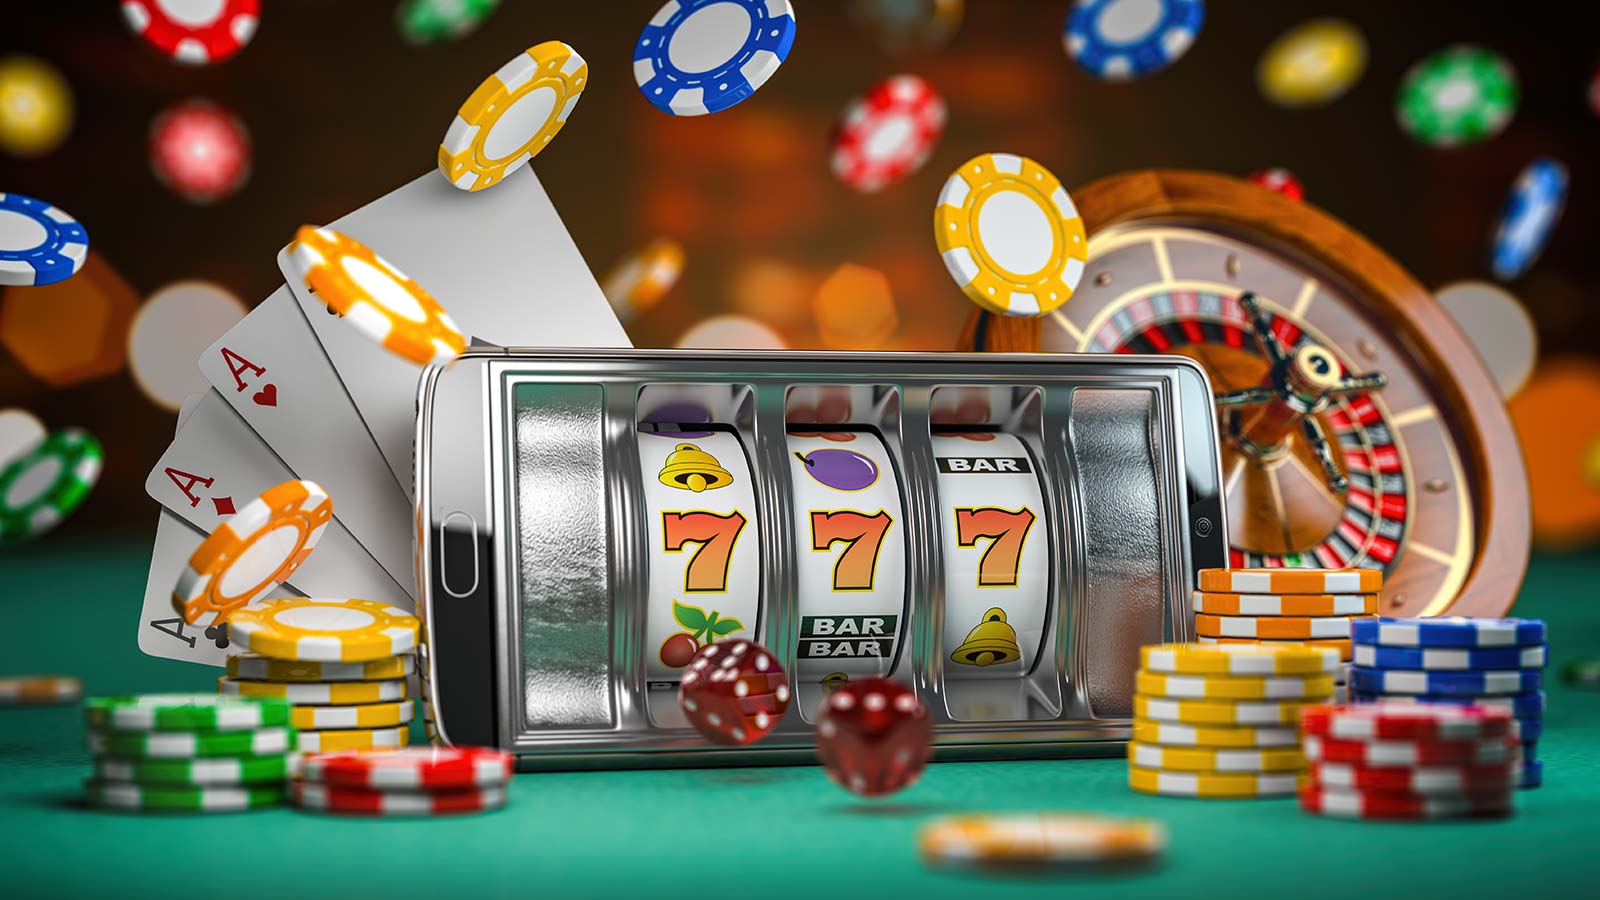 online casino with best payouts